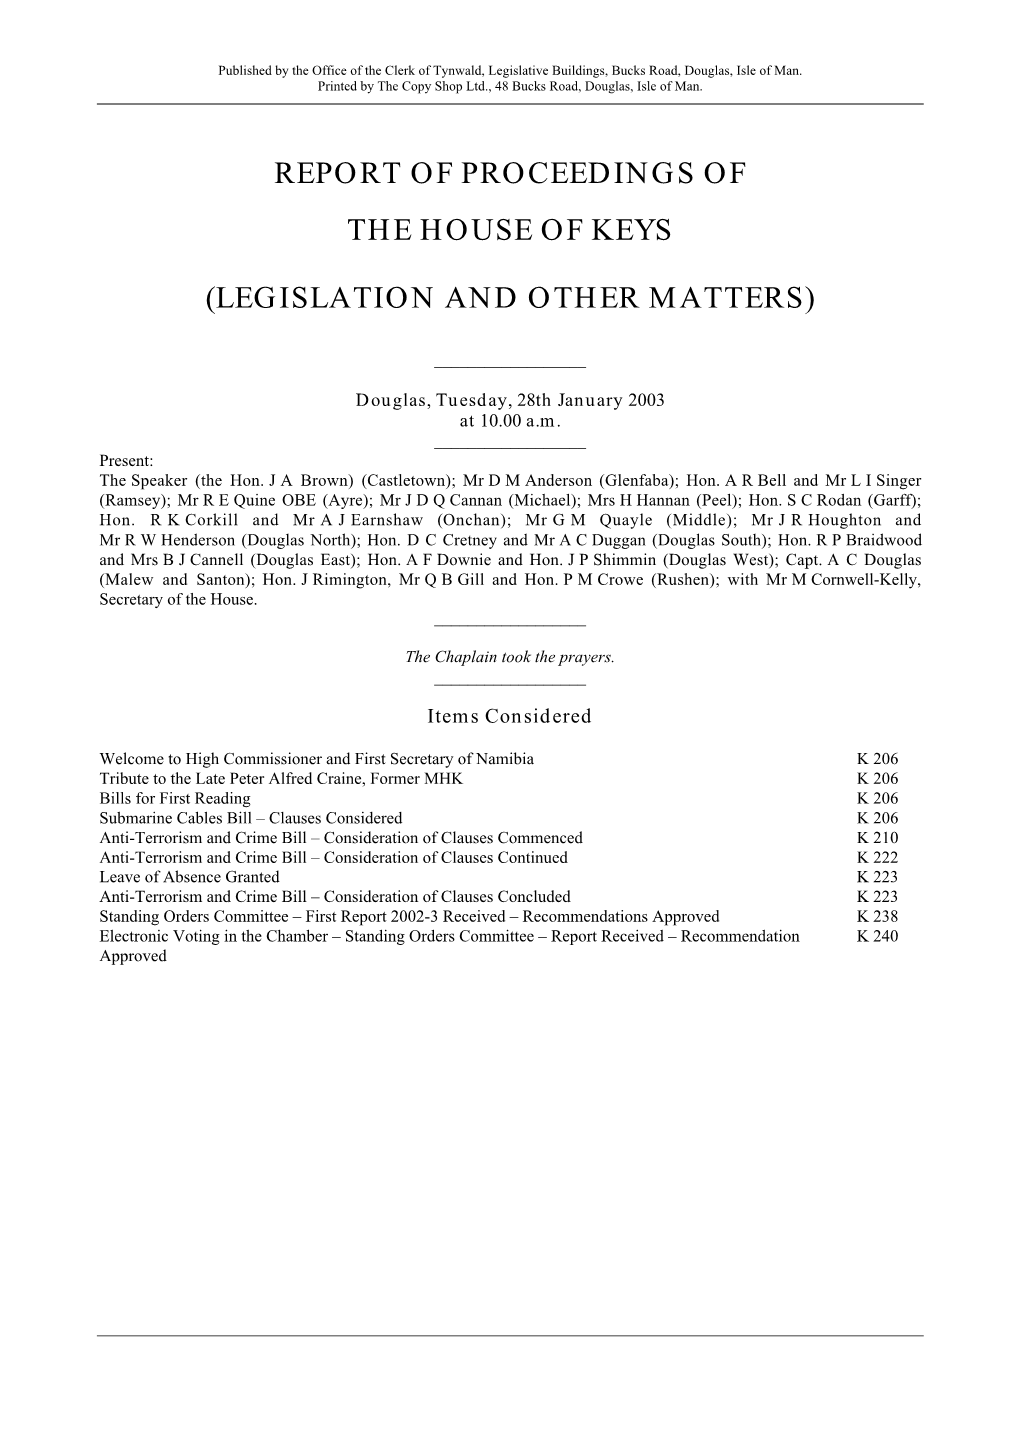 Report of Proceedings of the House of Keys (Legislation and Other Matters)